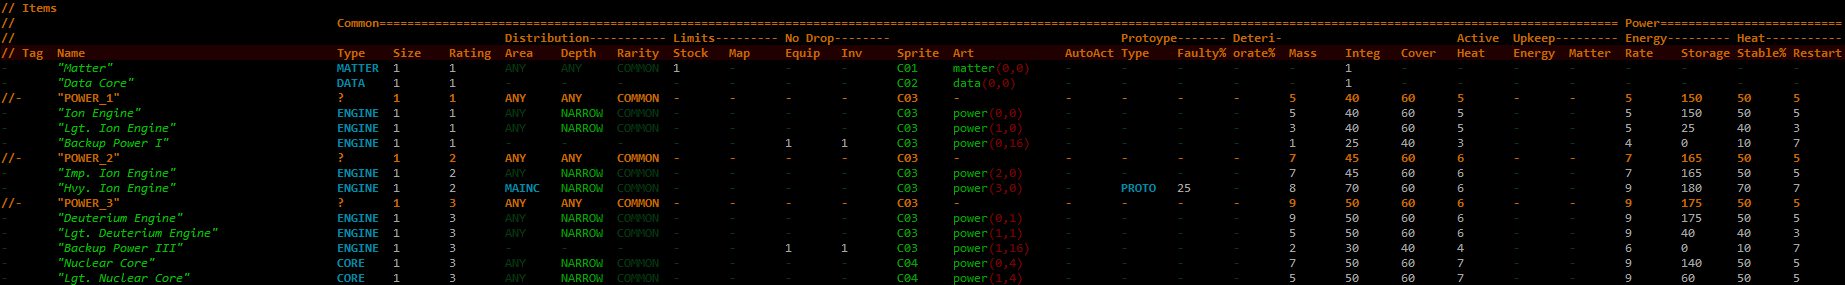 Cogmind Items Static Data File Excerpt